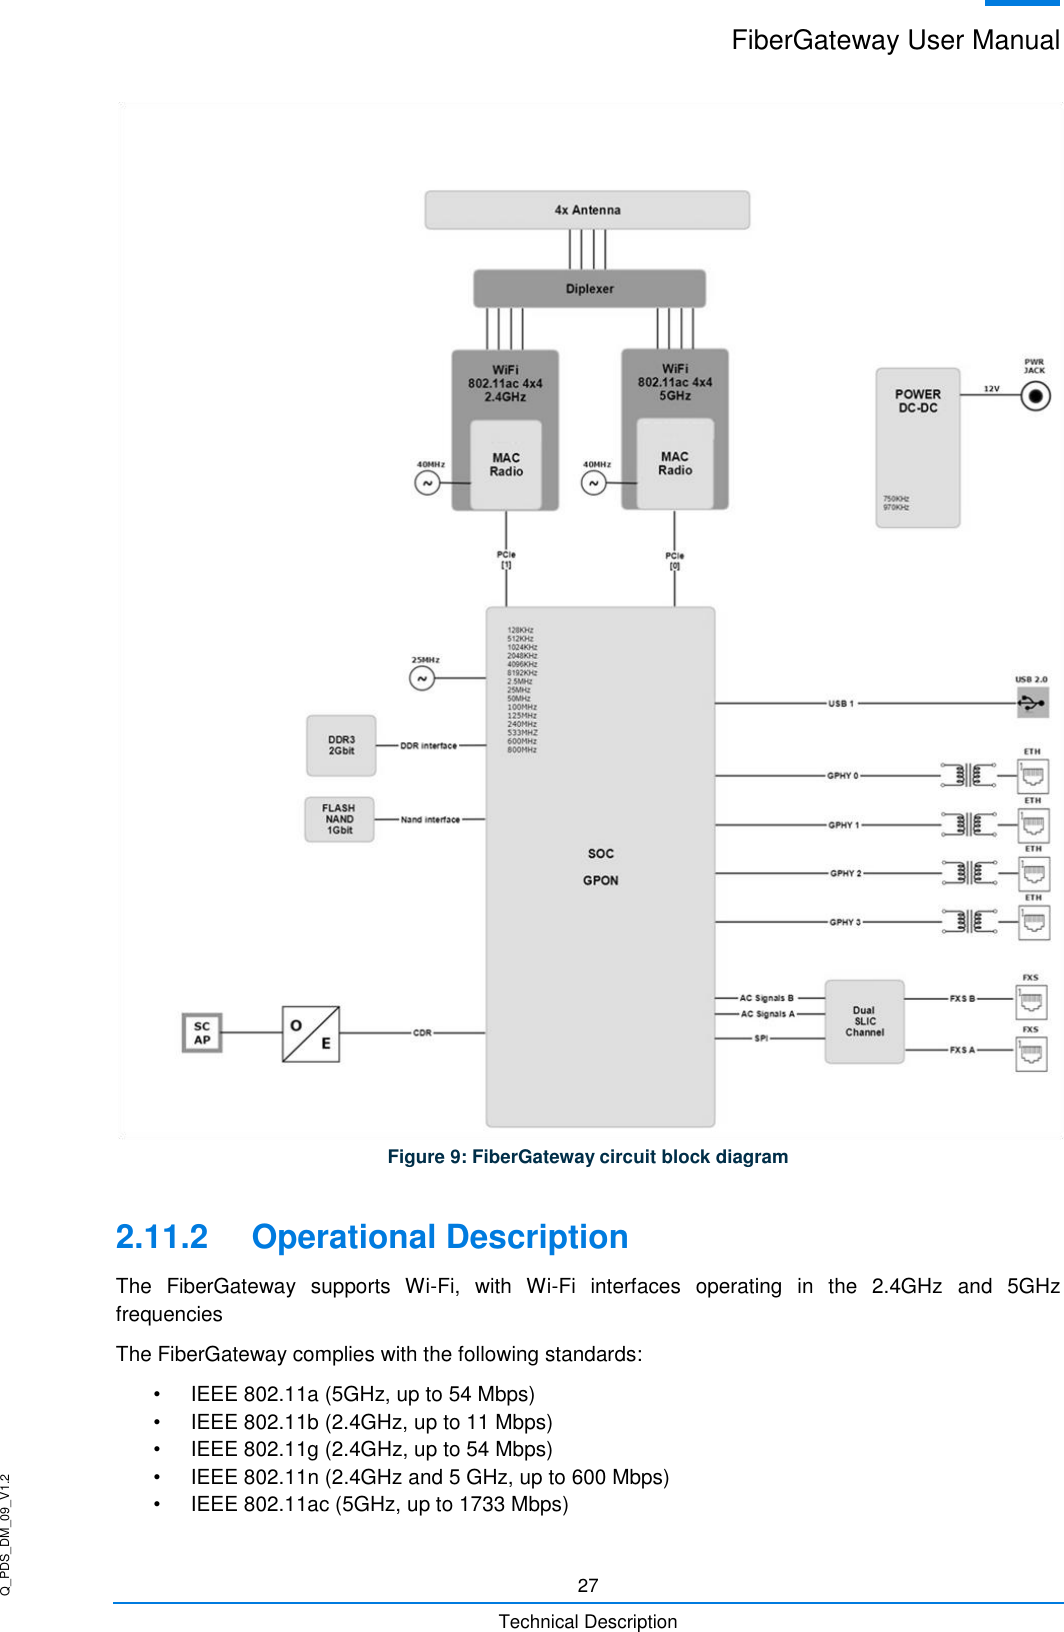 Q_PDS_DM_09_V1.2 FiberGateway User Manual  27 Technical Description  Figure 9: FiberGateway circuit block diagram 2.11.2  Operational Description The  FiberGateway  supports  Wi-Fi,  with  Wi-Fi  interfaces  operating  in  the  2.4GHz  and  5GHz frequencies The FiberGateway complies with the following standards: •  IEEE 802.11a (5GHz, up to 54 Mbps) •  IEEE 802.11b (2.4GHz, up to 11 Mbps) •  IEEE 802.11g (2.4GHz, up to 54 Mbps) •  IEEE 802.11n (2.4GHz and 5 GHz, up to 600 Mbps) •  IEEE 802.11ac (5GHz, up to 1733 Mbps) 